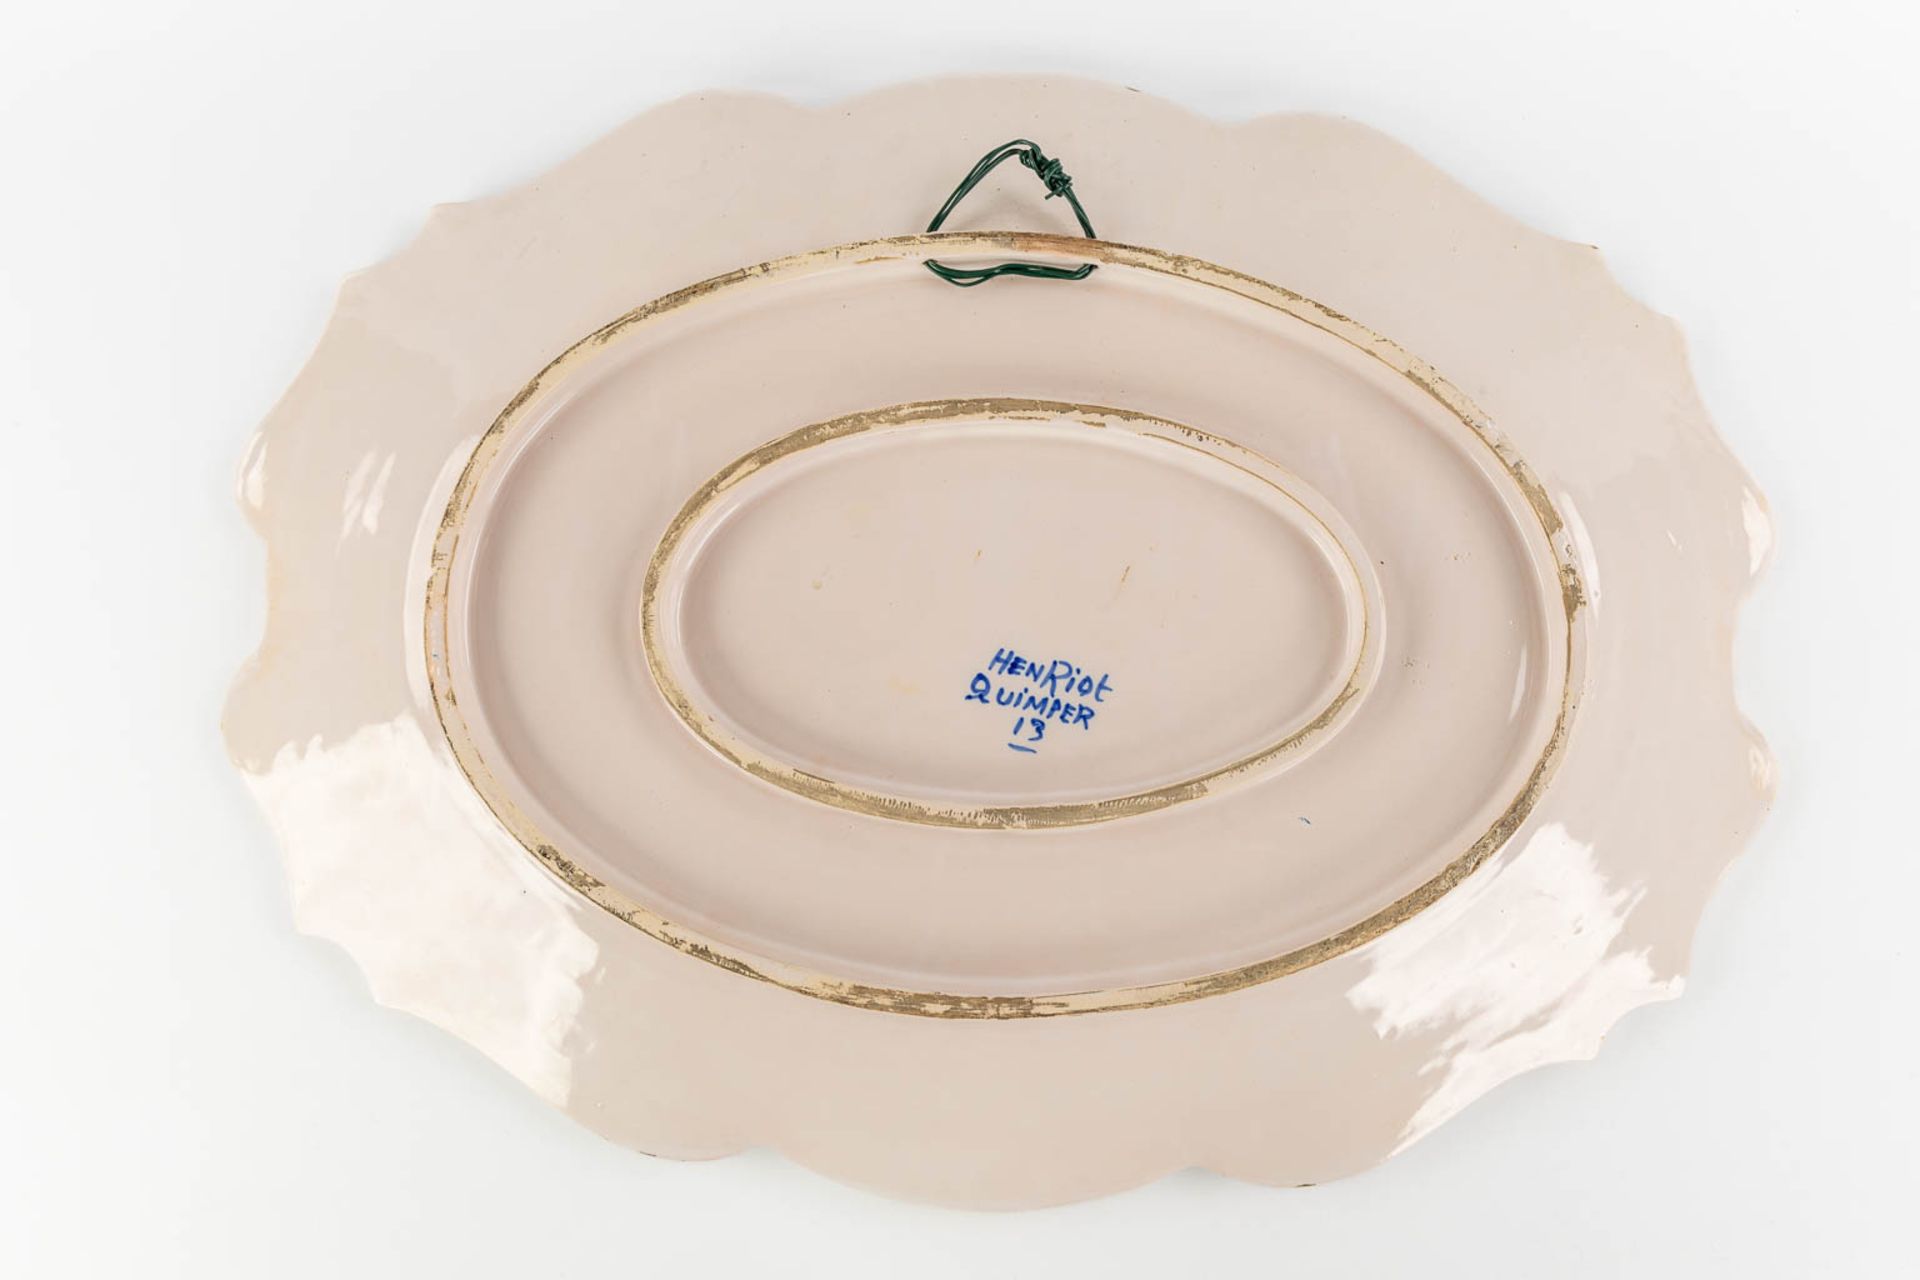 Henriot Quimper, a large faience serving platter with hand-painted decor. (L:48 x W:65 cm) - Image 13 of 14